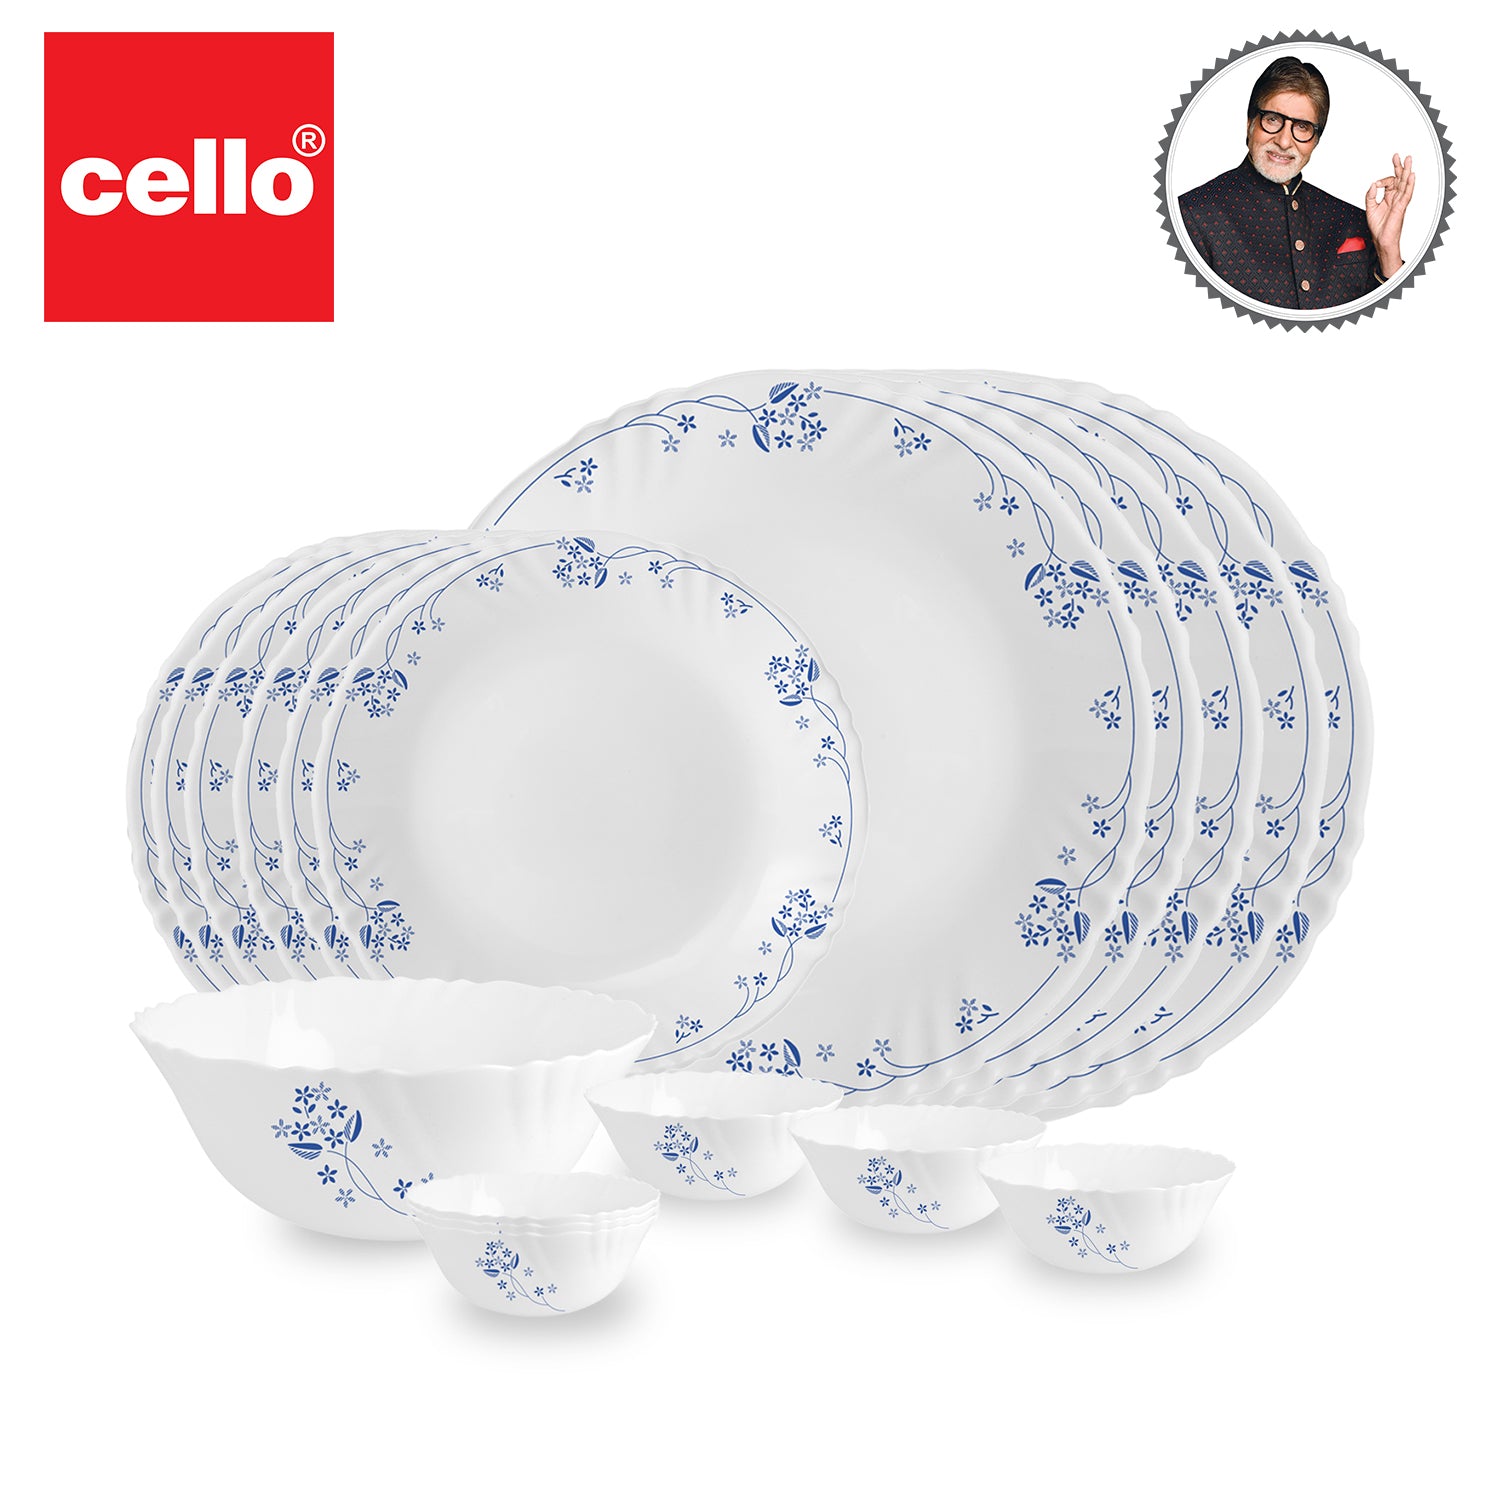 Imperial Series 19 Pieces Opalware Dinner Set for Family of 6 Dainty Blue